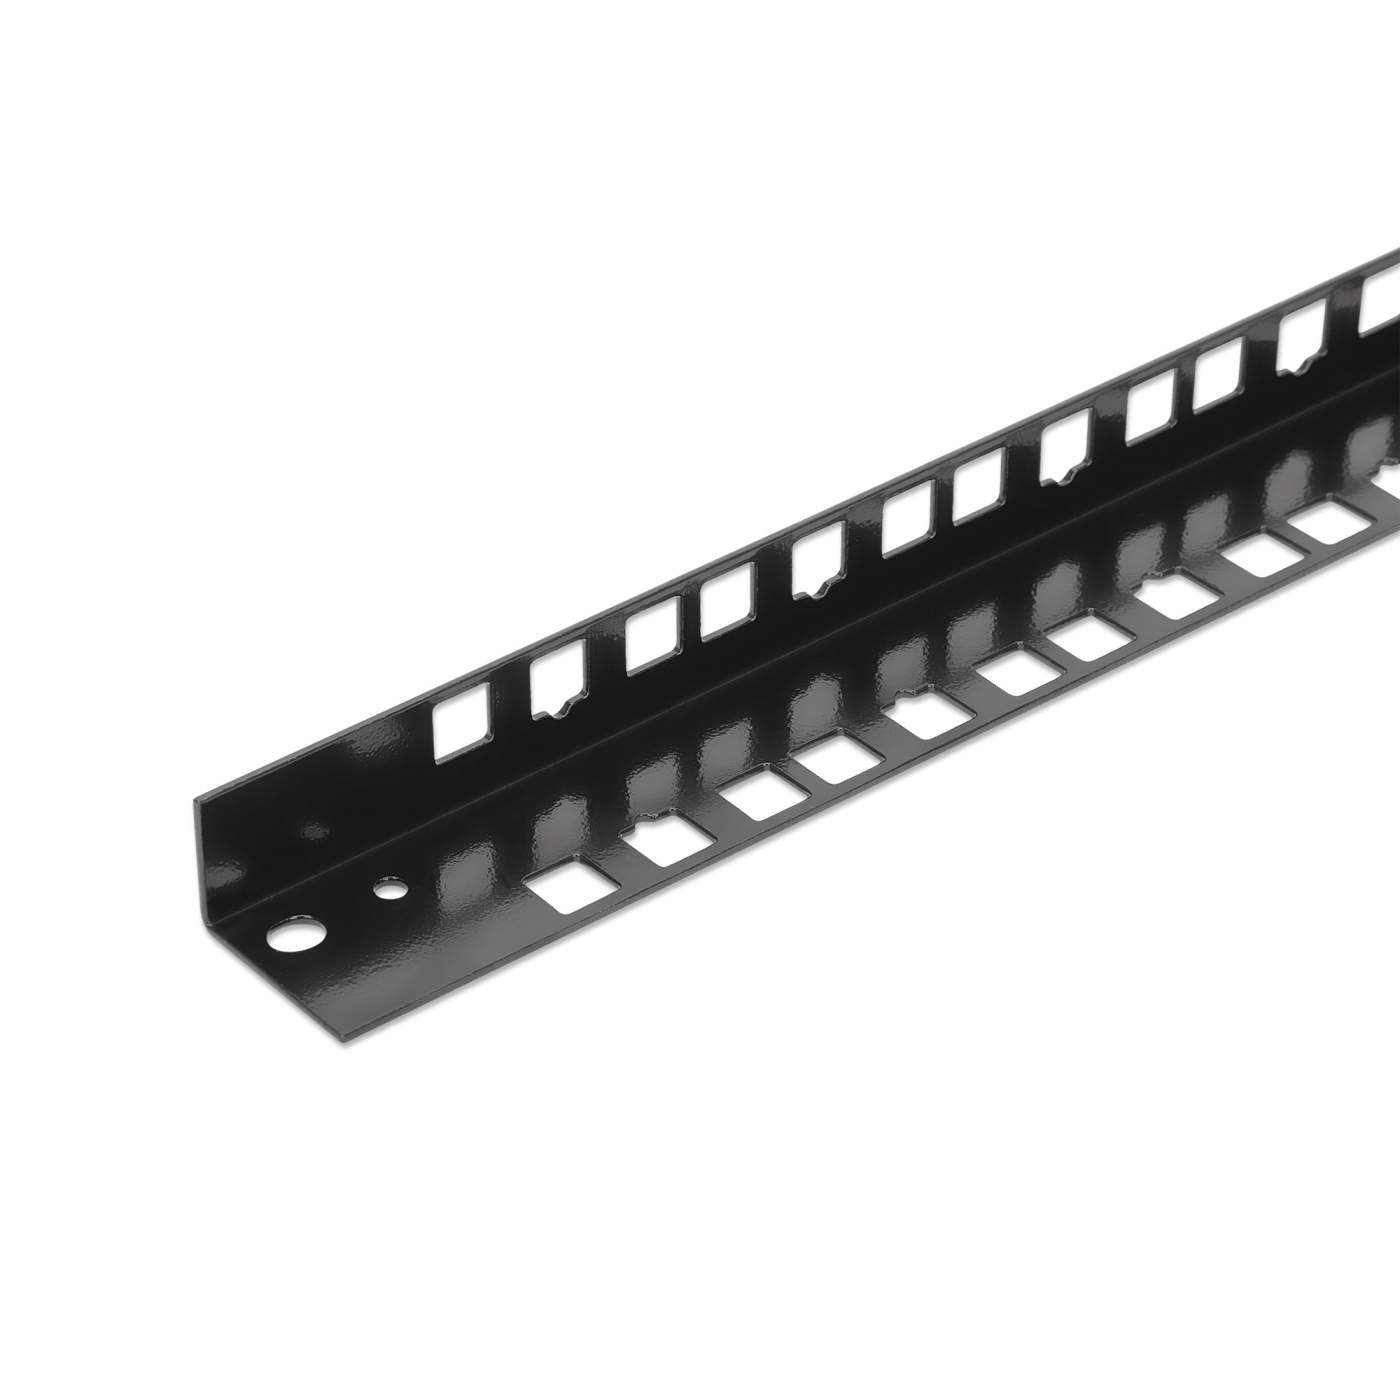 Spare Rails for 19" Wallmount Cabinets, 6U Image 4